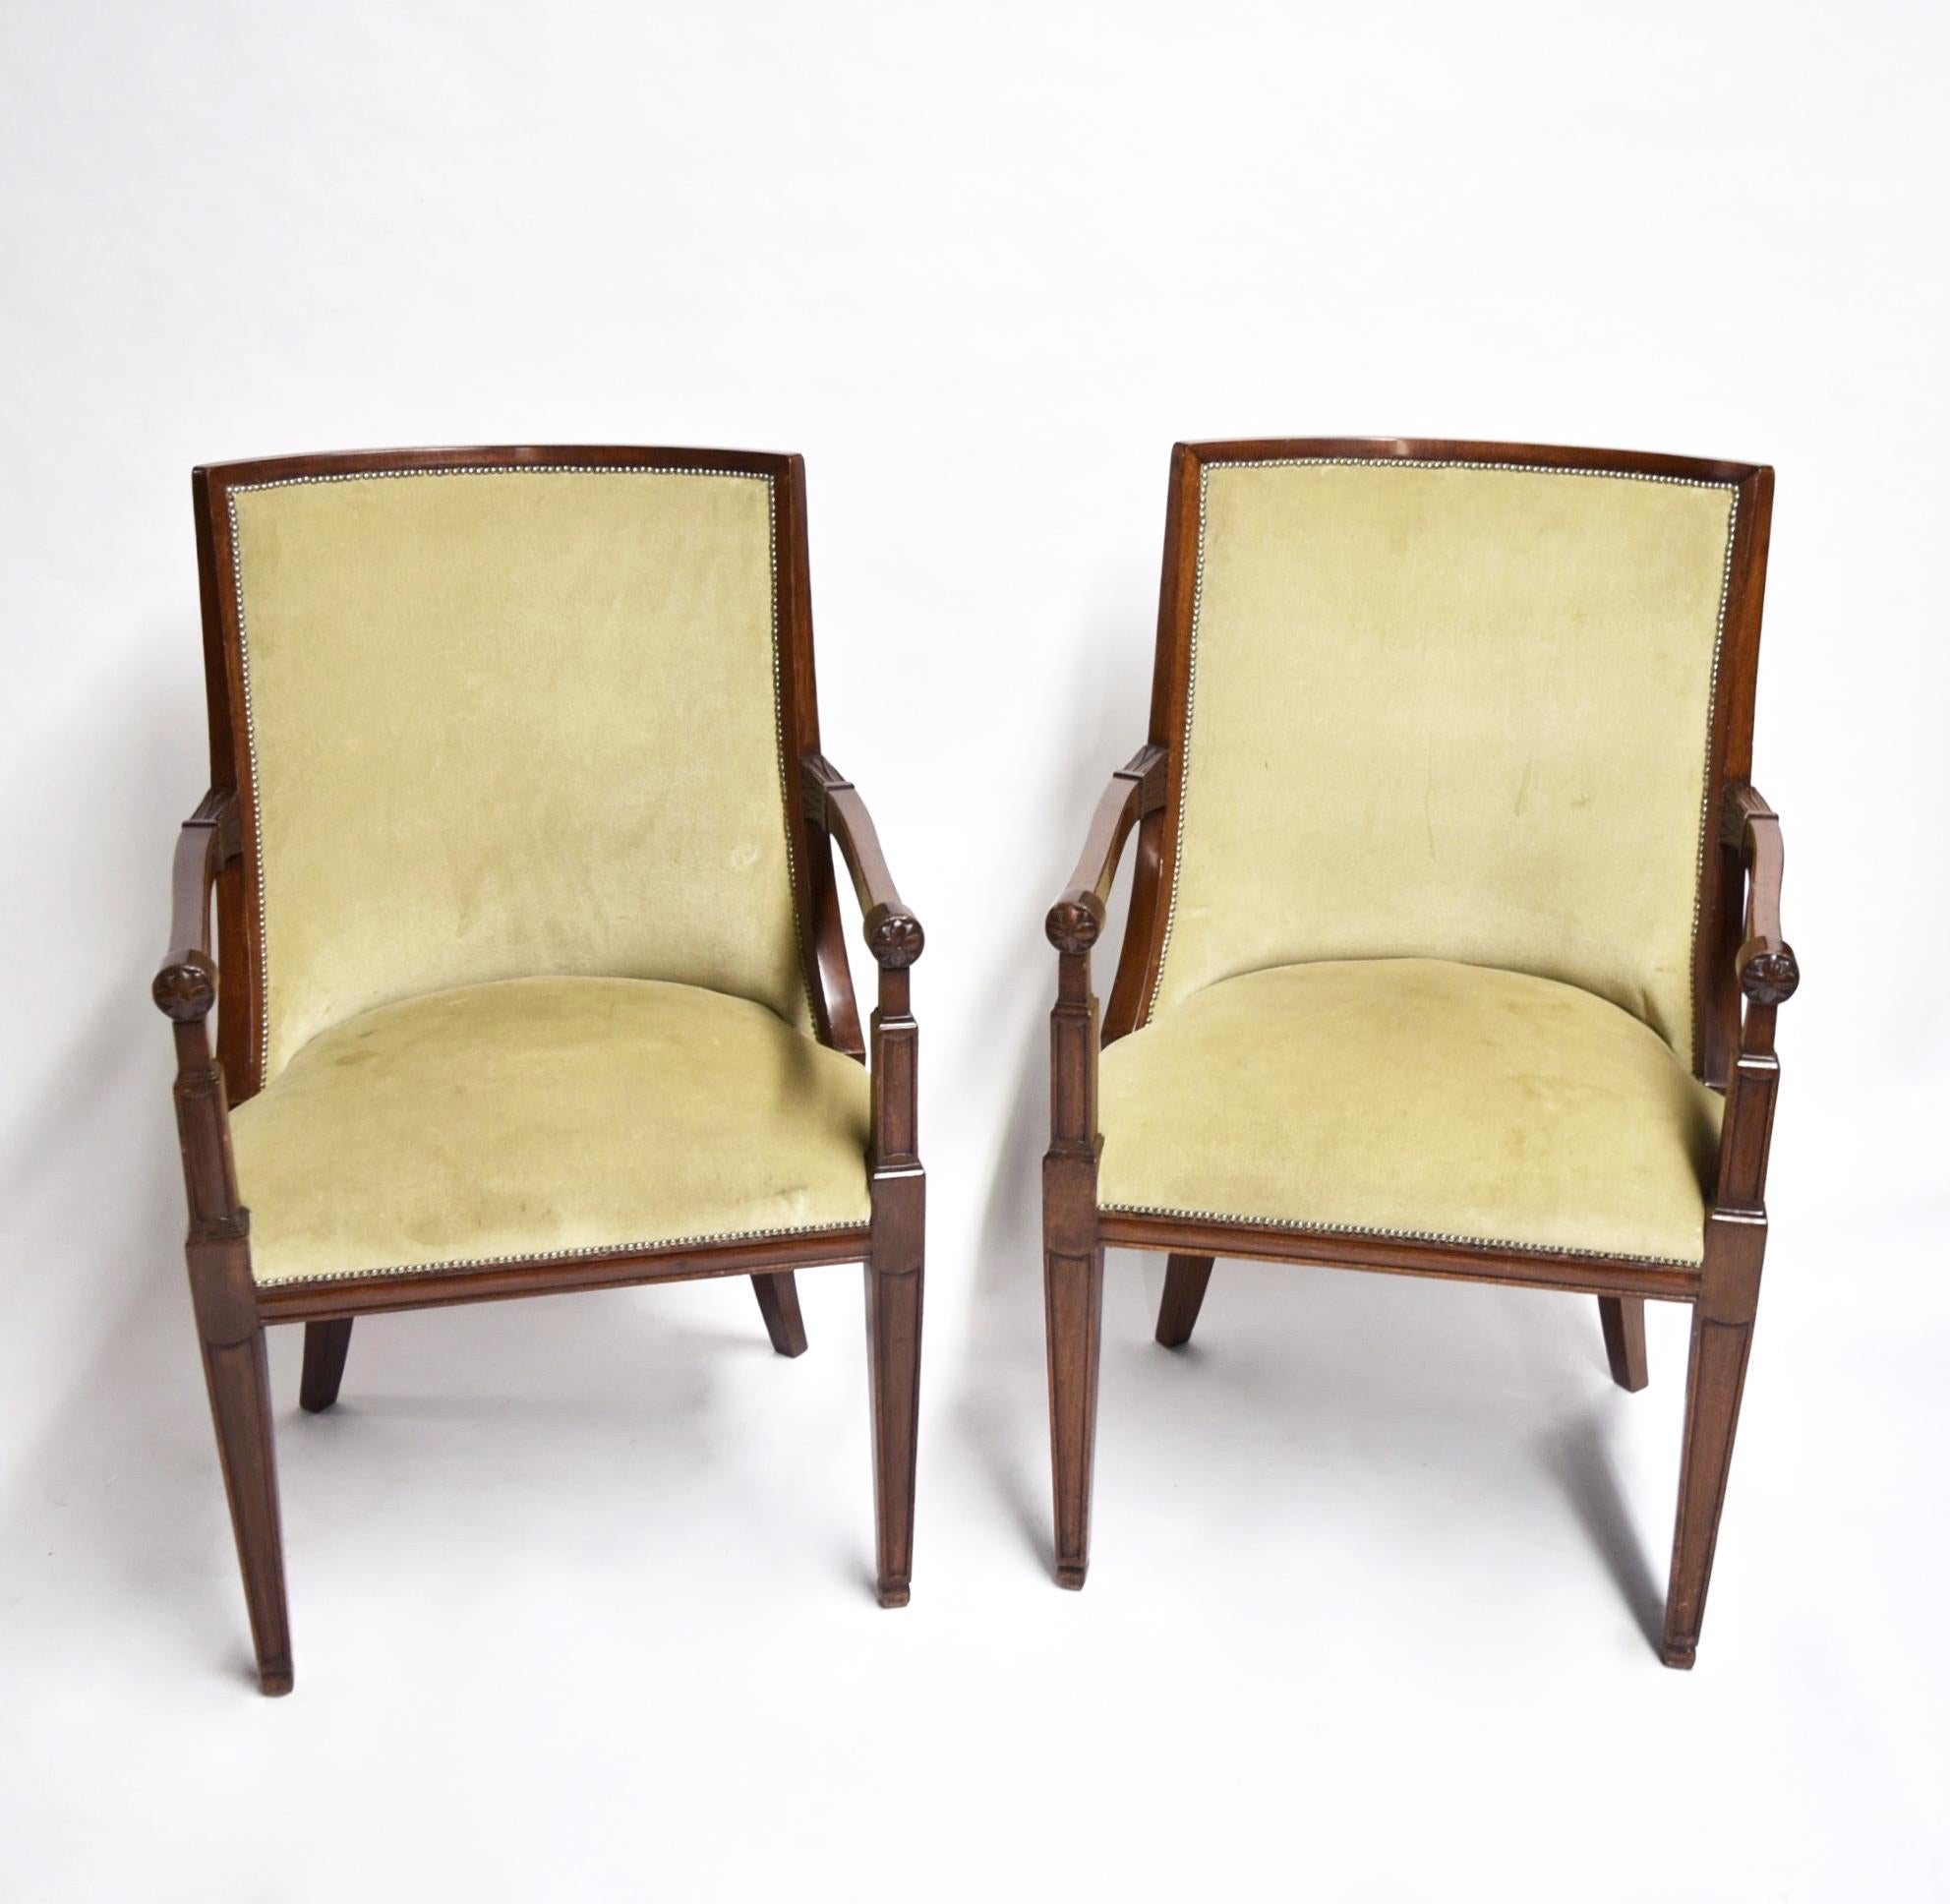 Pair of Mahogany Wood and Beige Mohair Velvet Armchairs, France Circa 1840 In Good Condition For Sale In Jersey City, NJ